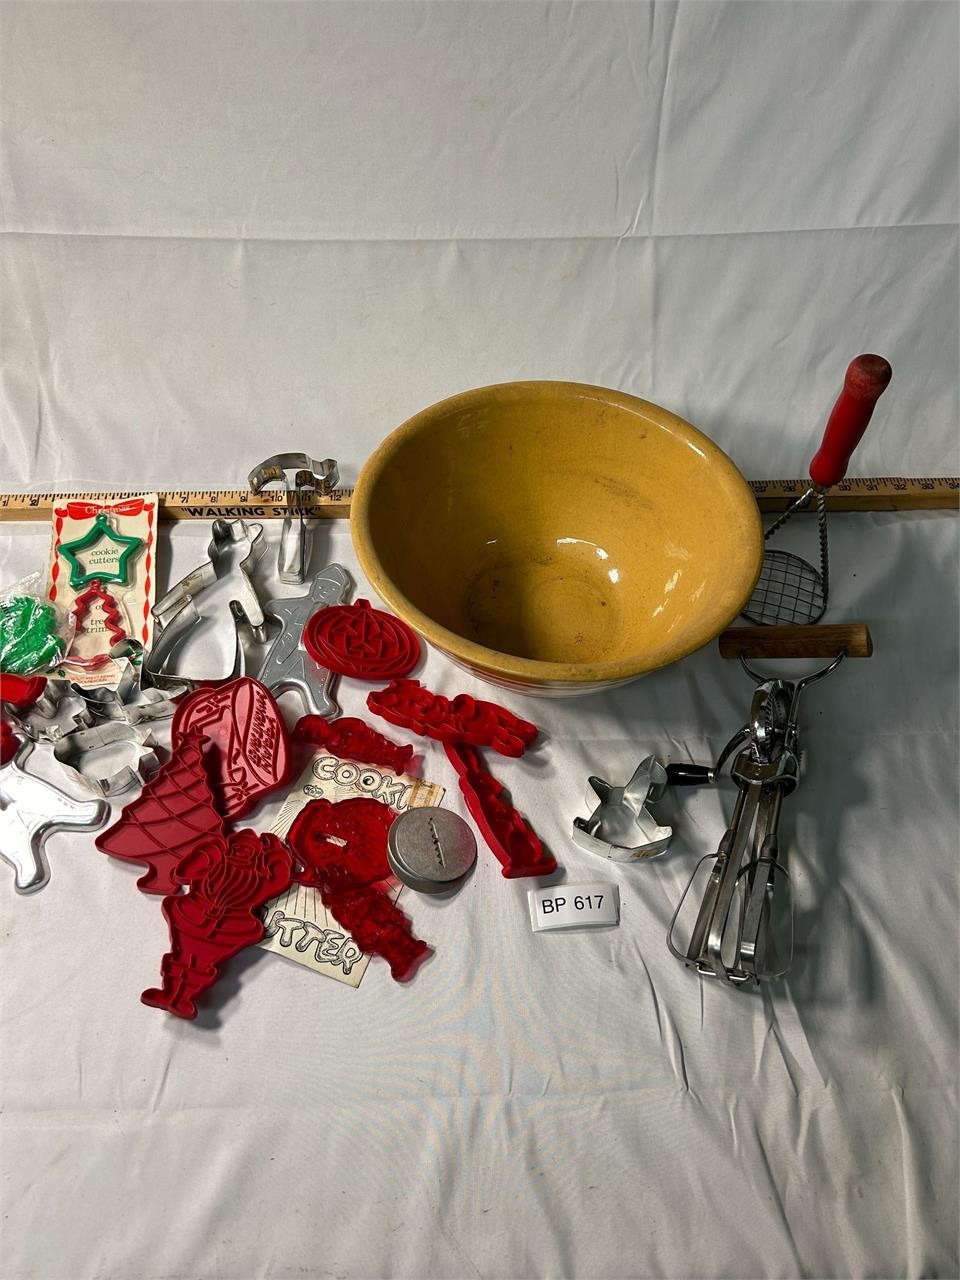 VTG Yellow-ware Mixing Bowl & Cookie Cutters